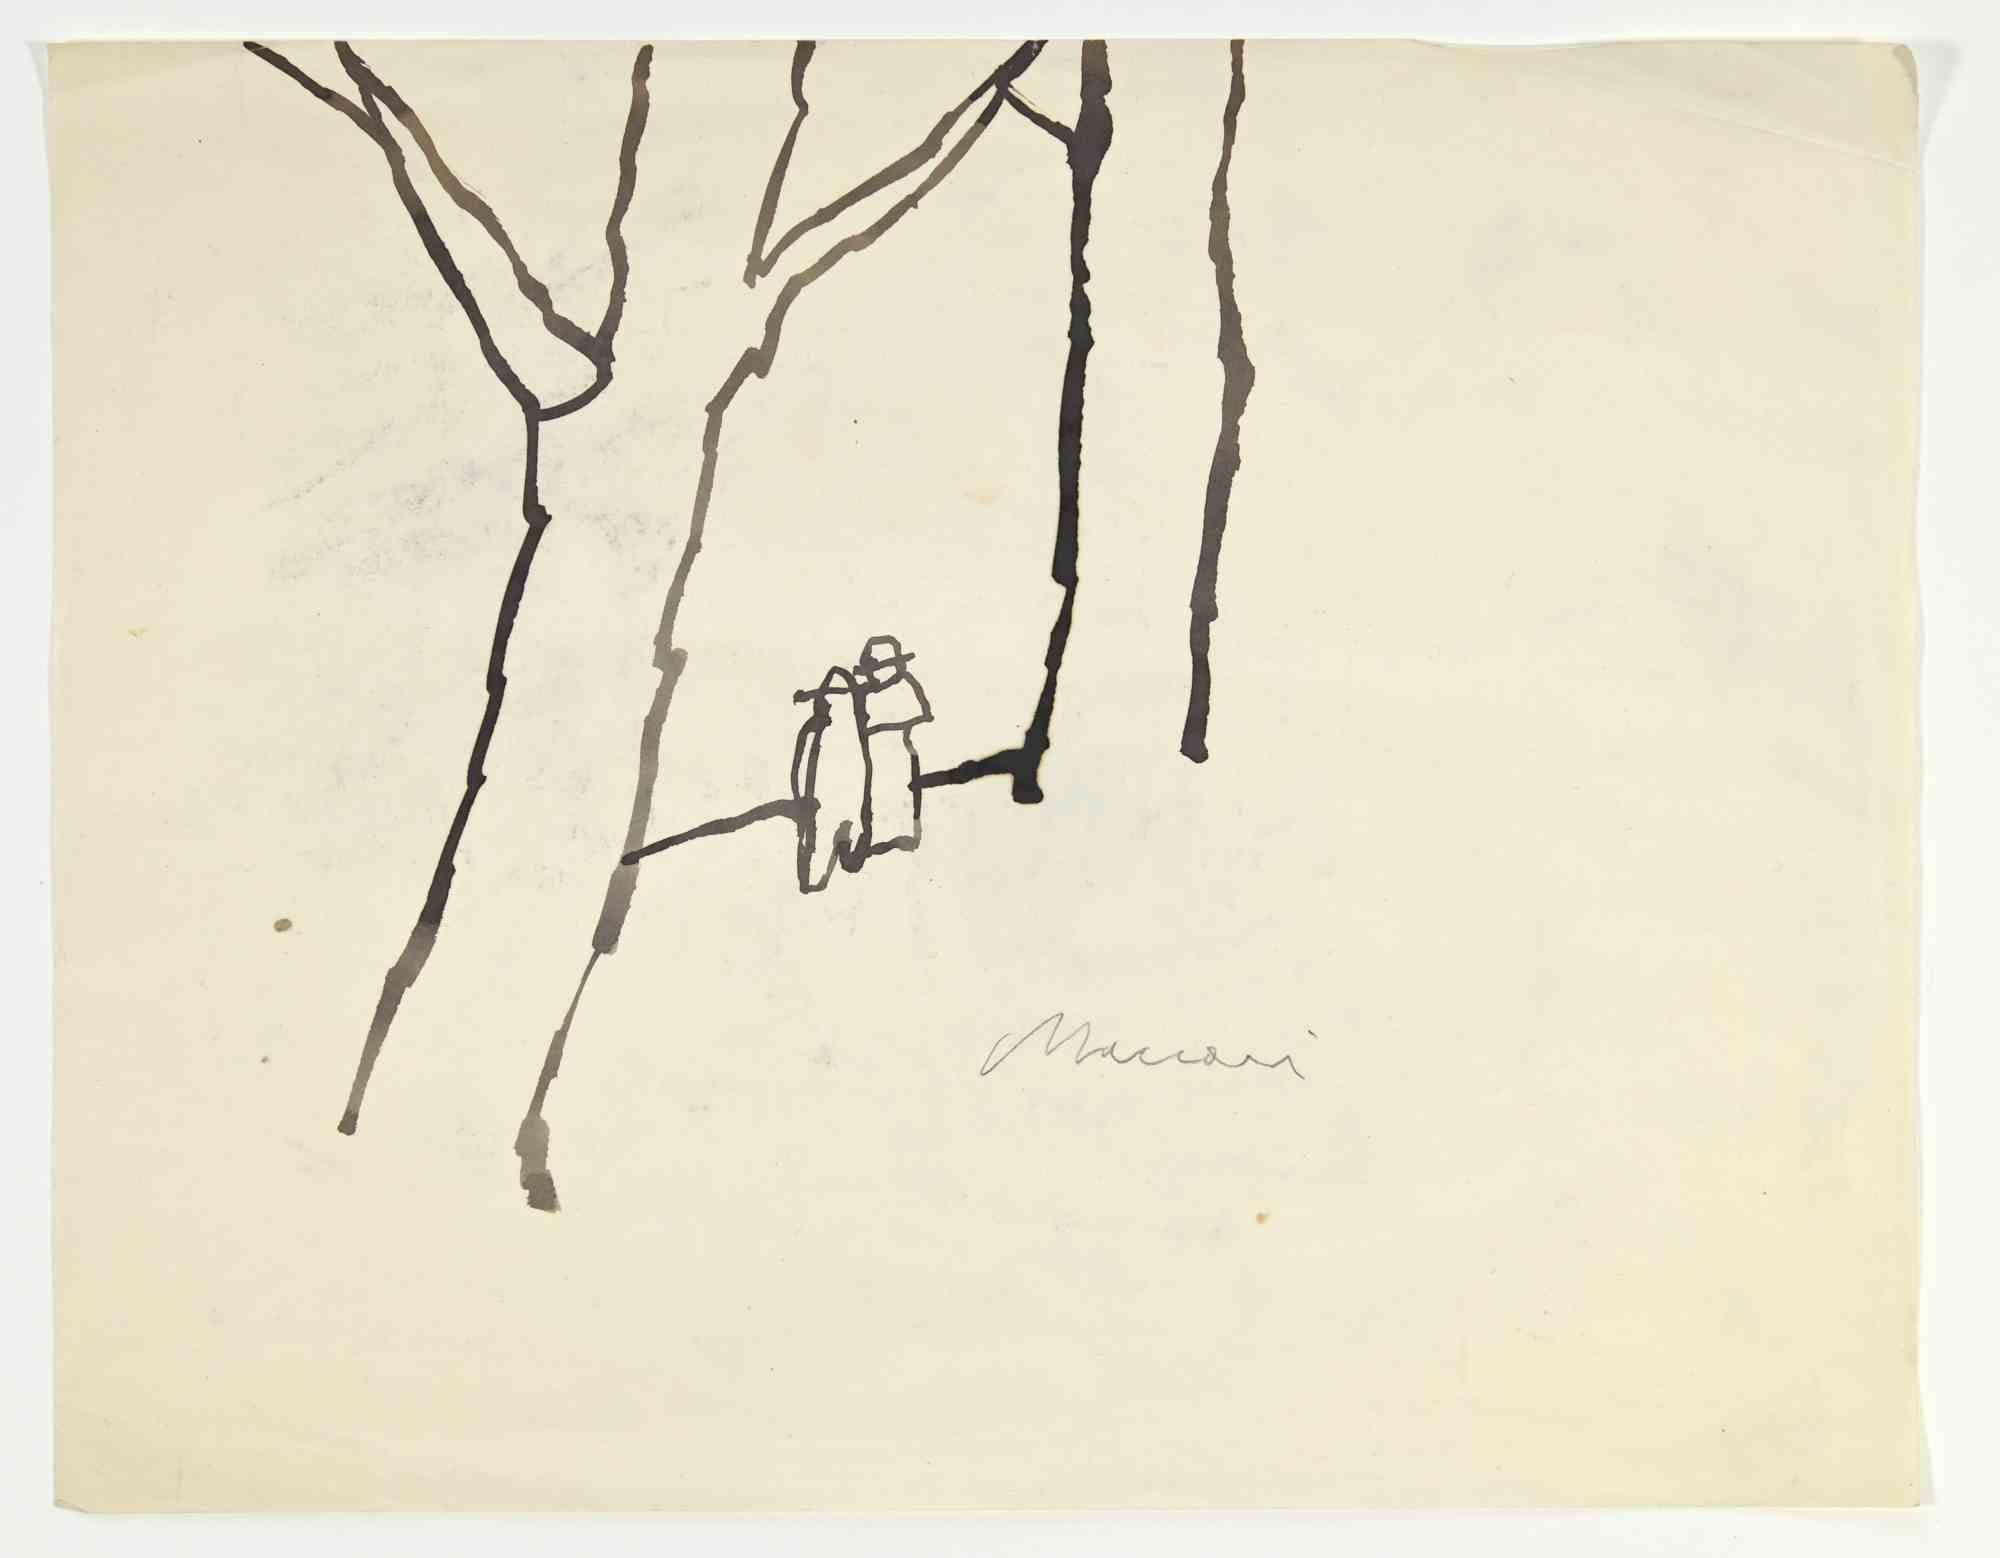 Into the Woods - Drawing by Mino Maccari - 1960s